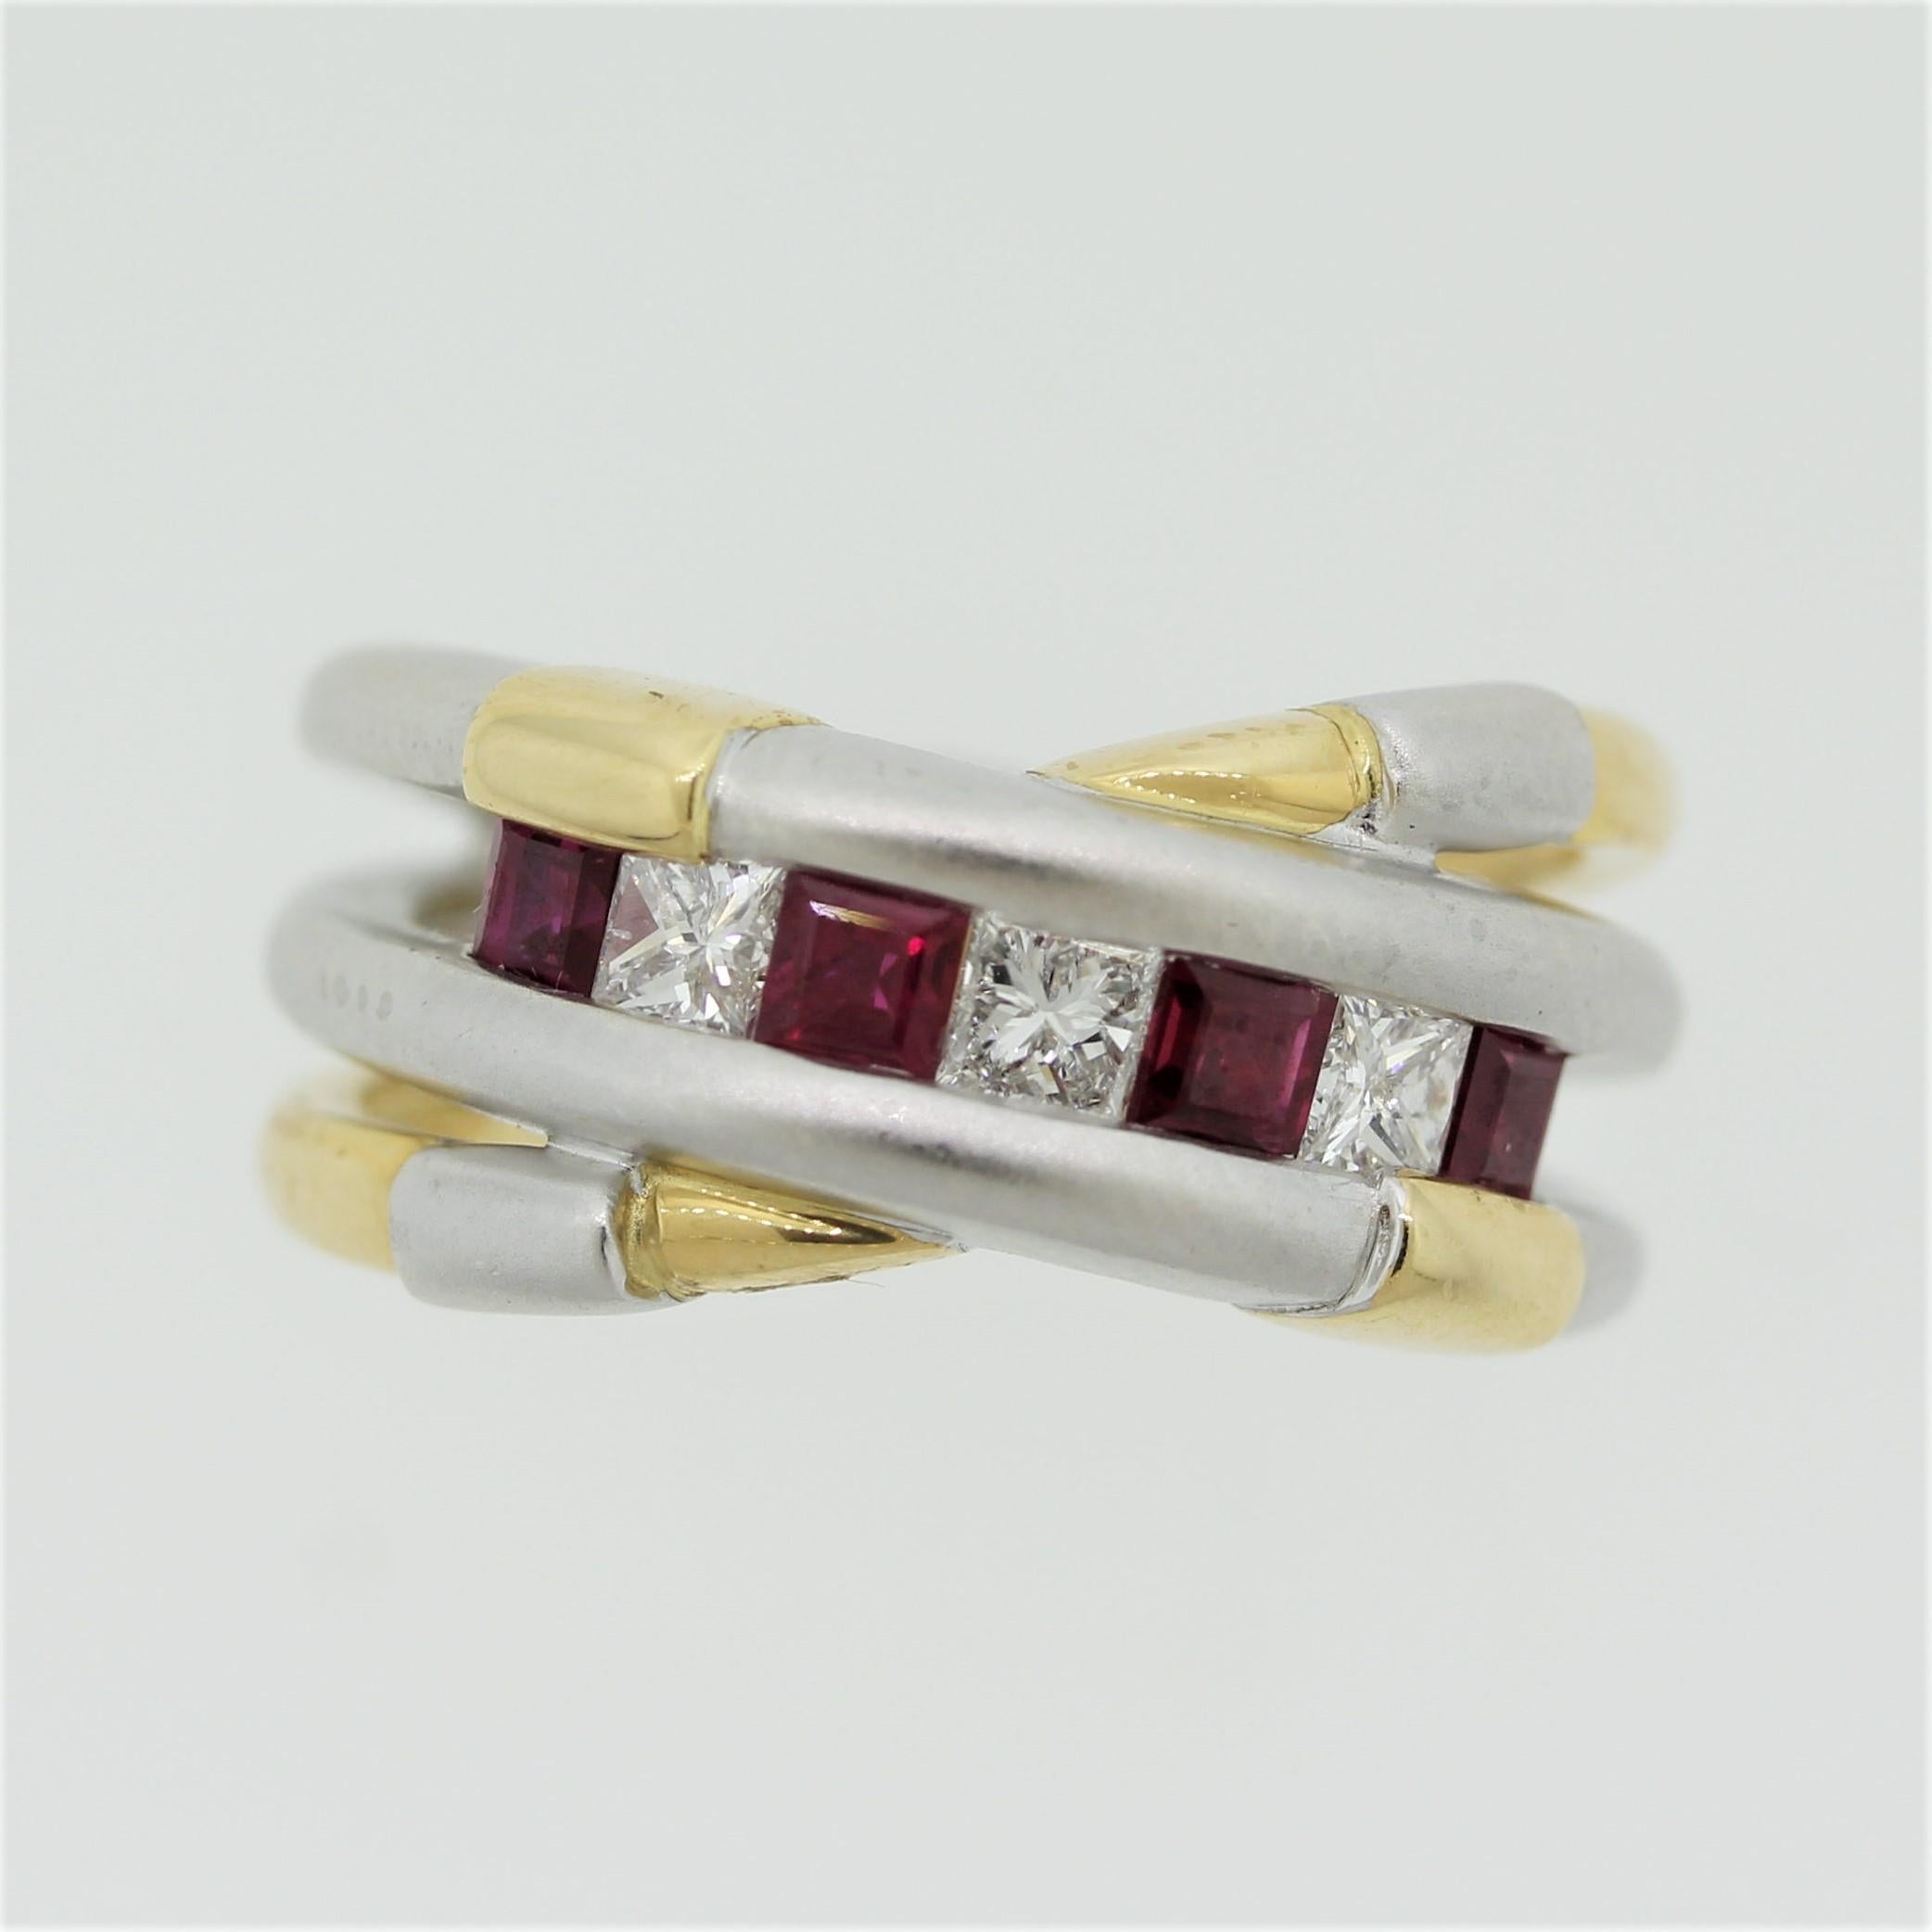 One of our favorite rings in the collection due to the rings unique style and color blend. It features bright white princess-cut diamonds along with vivid red rubies which are channel-set one after the other. Adding to that, the ring is made both in